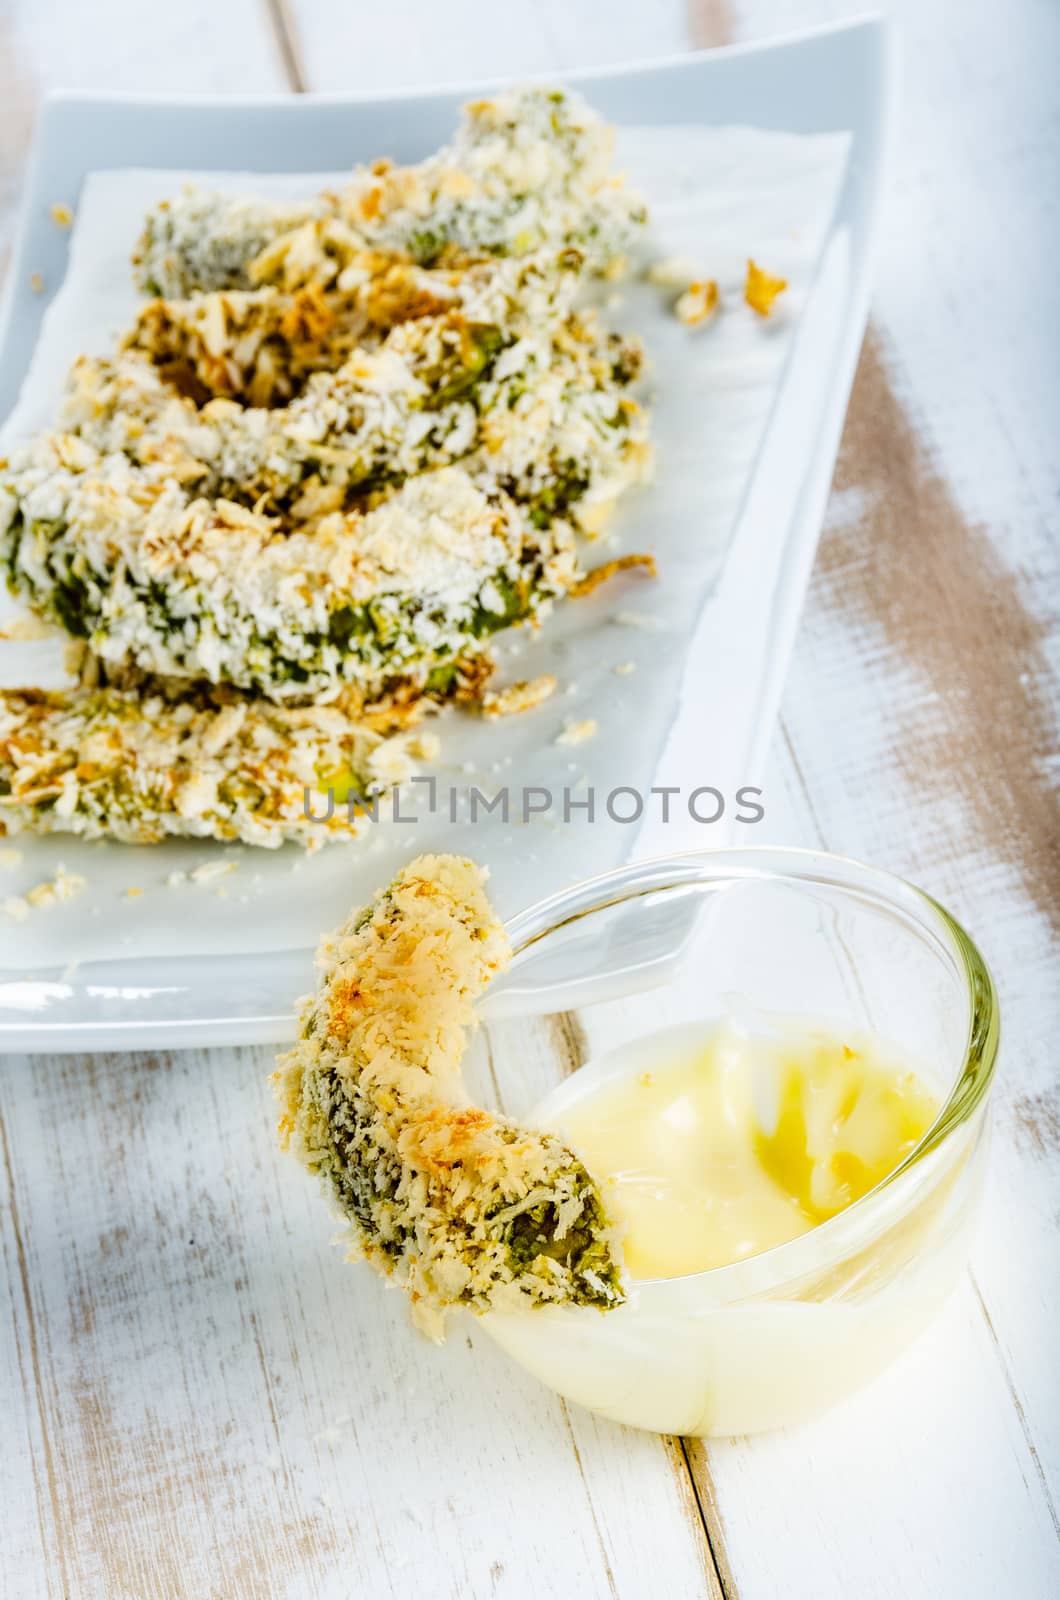 breaded baked avocado pieces served with a mayonnaise sauce on porcelain plate and white wood background